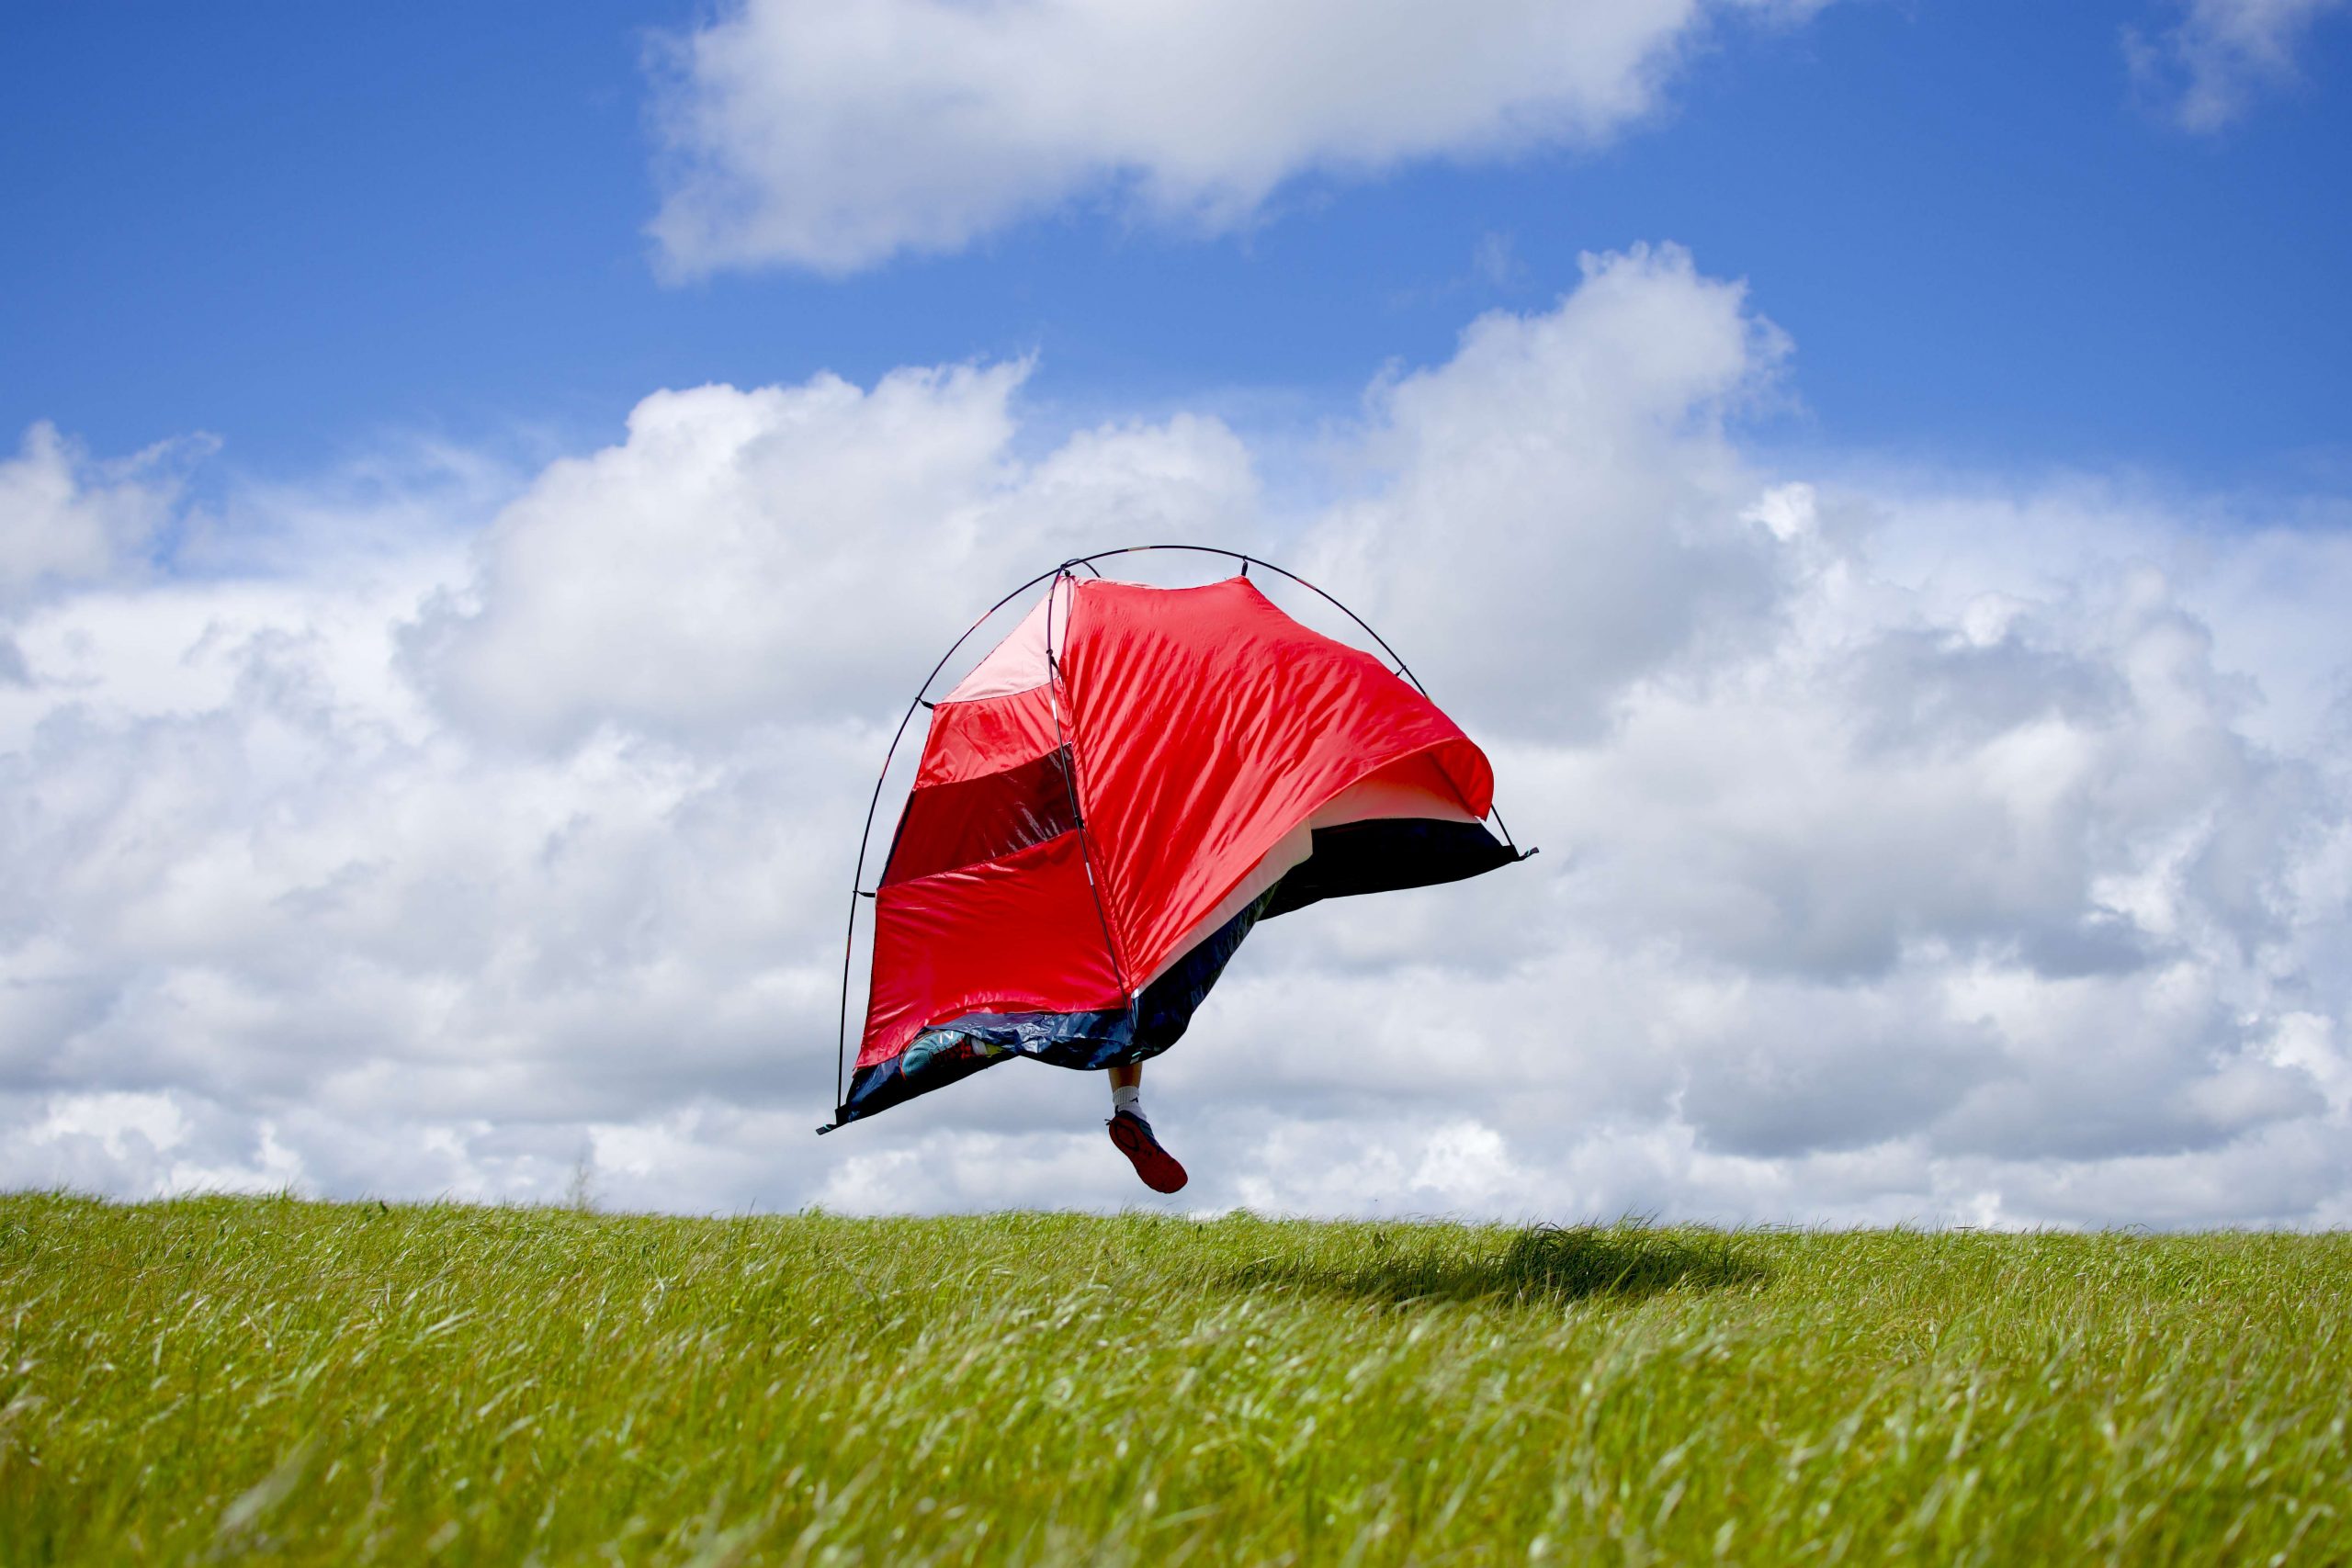 A person in a tent that is leaping off the ground